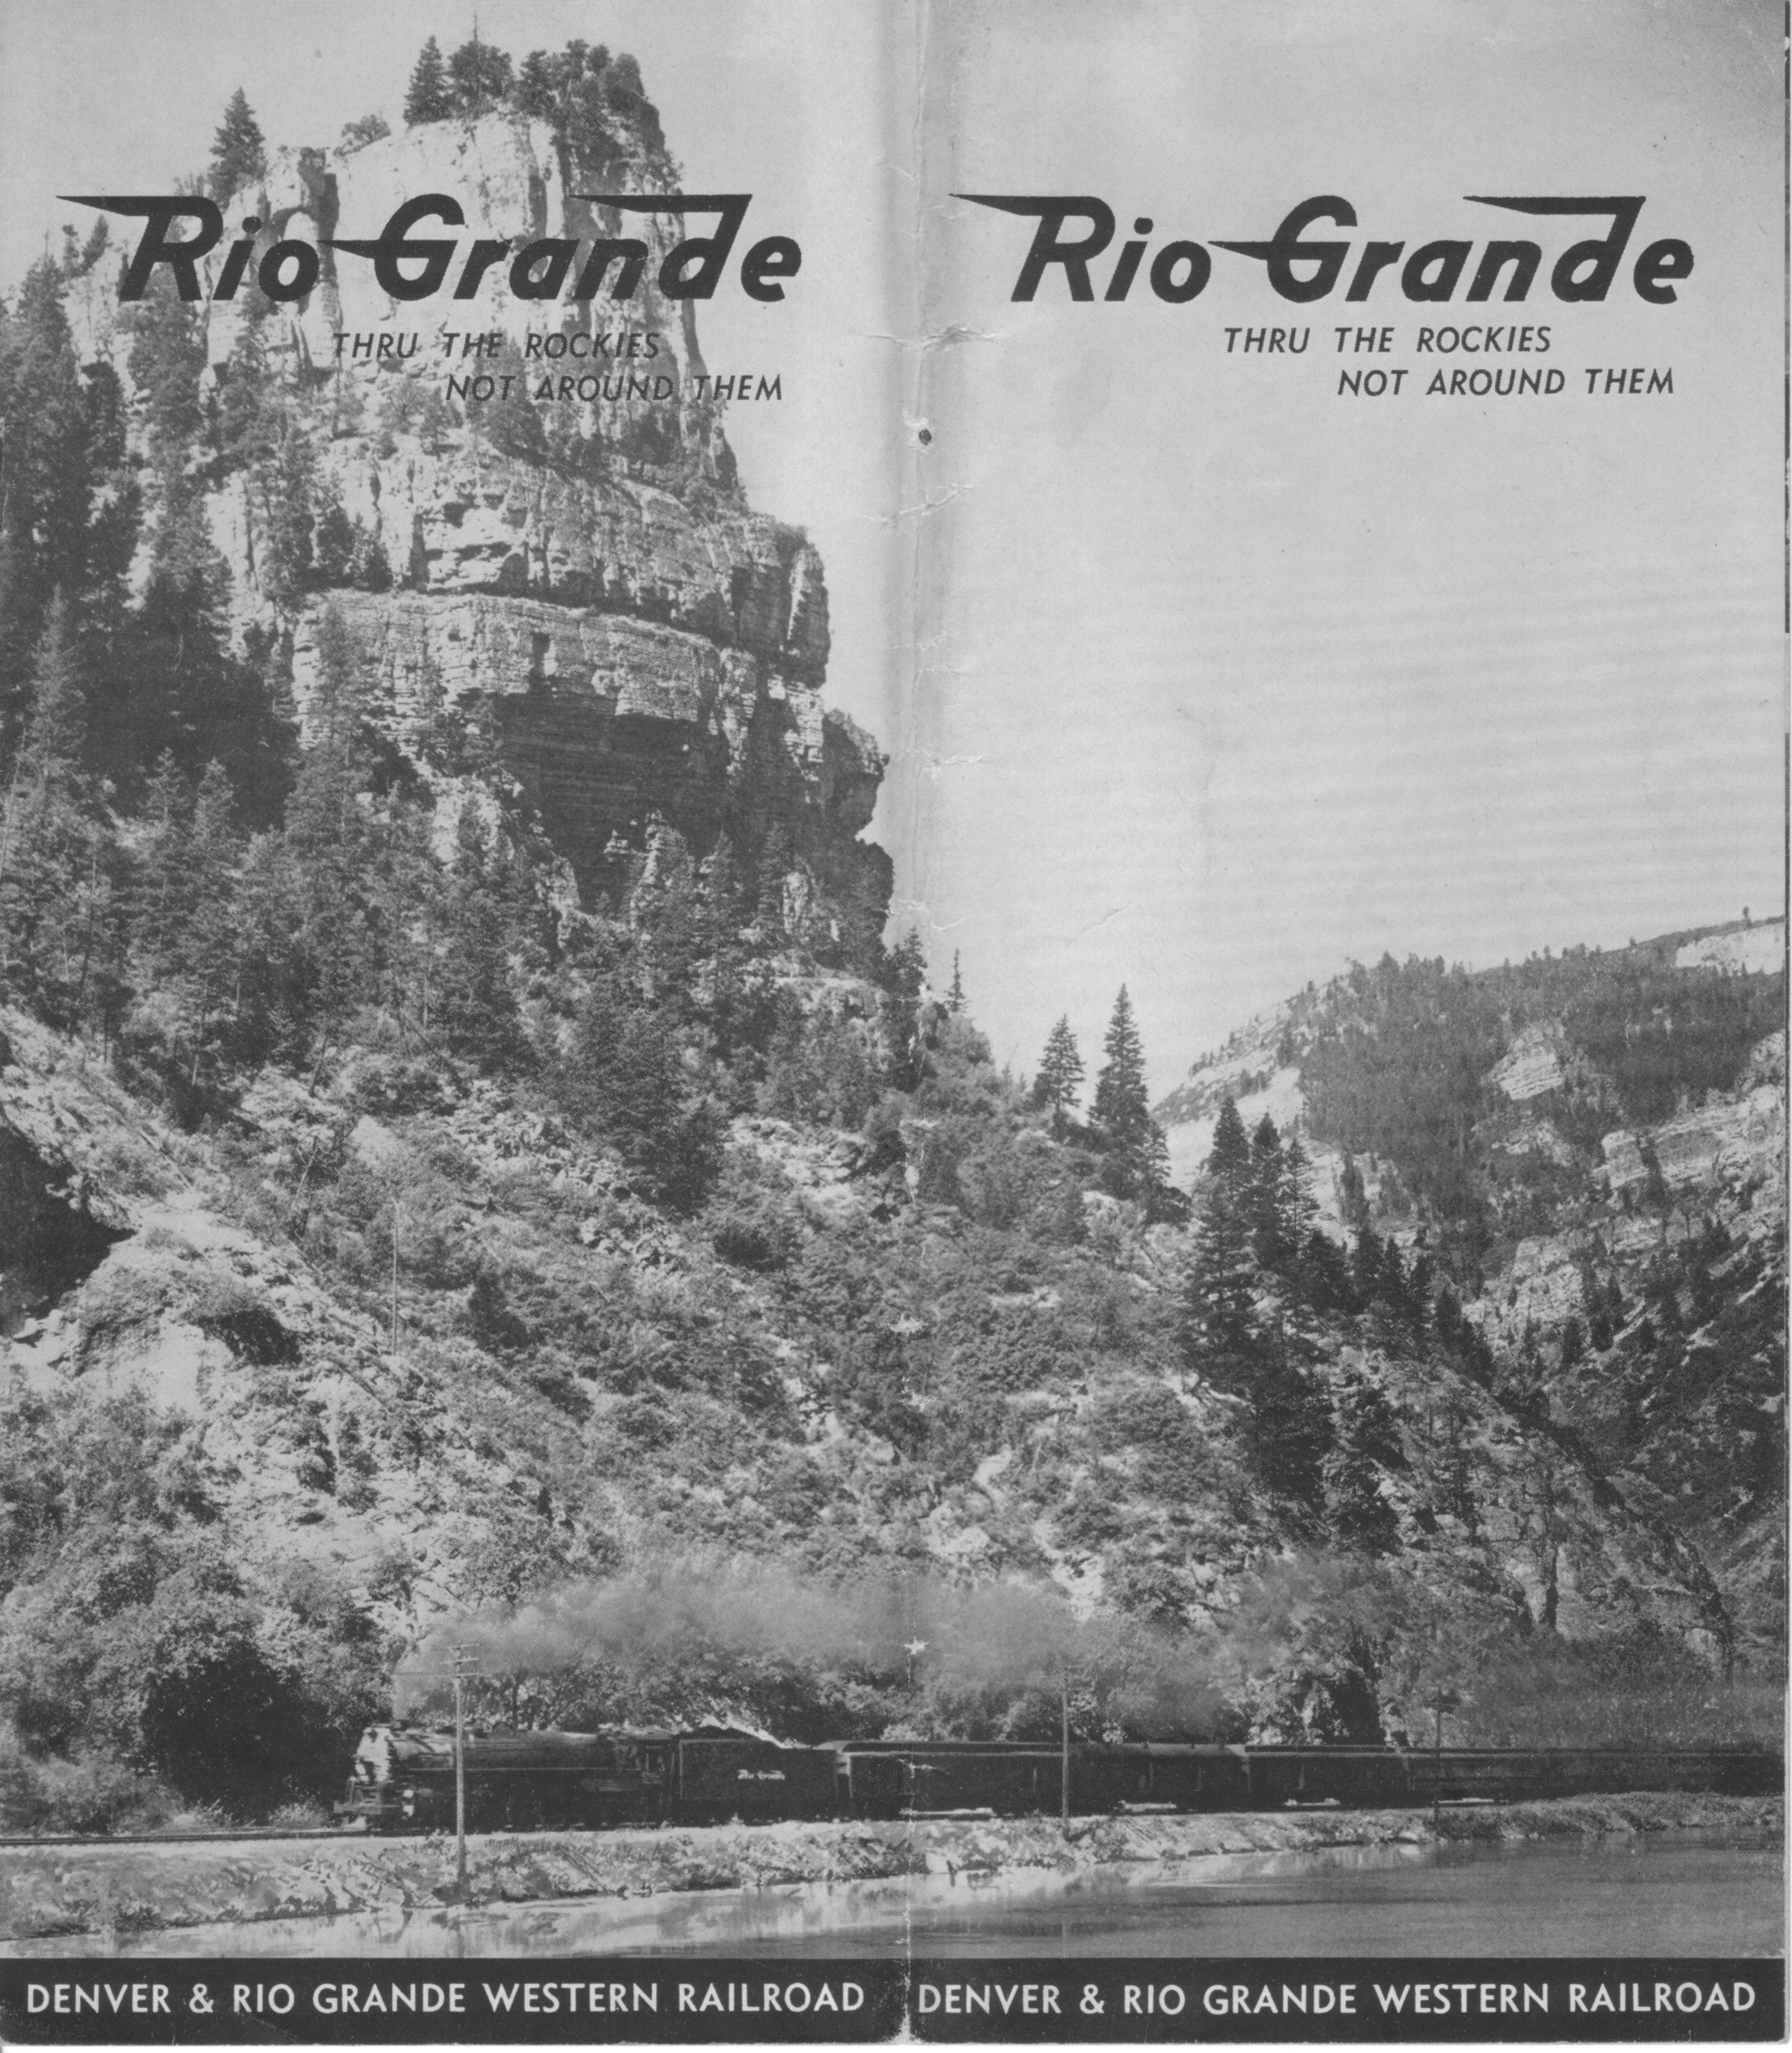 drgw_passguide_1940s_cover.jpg